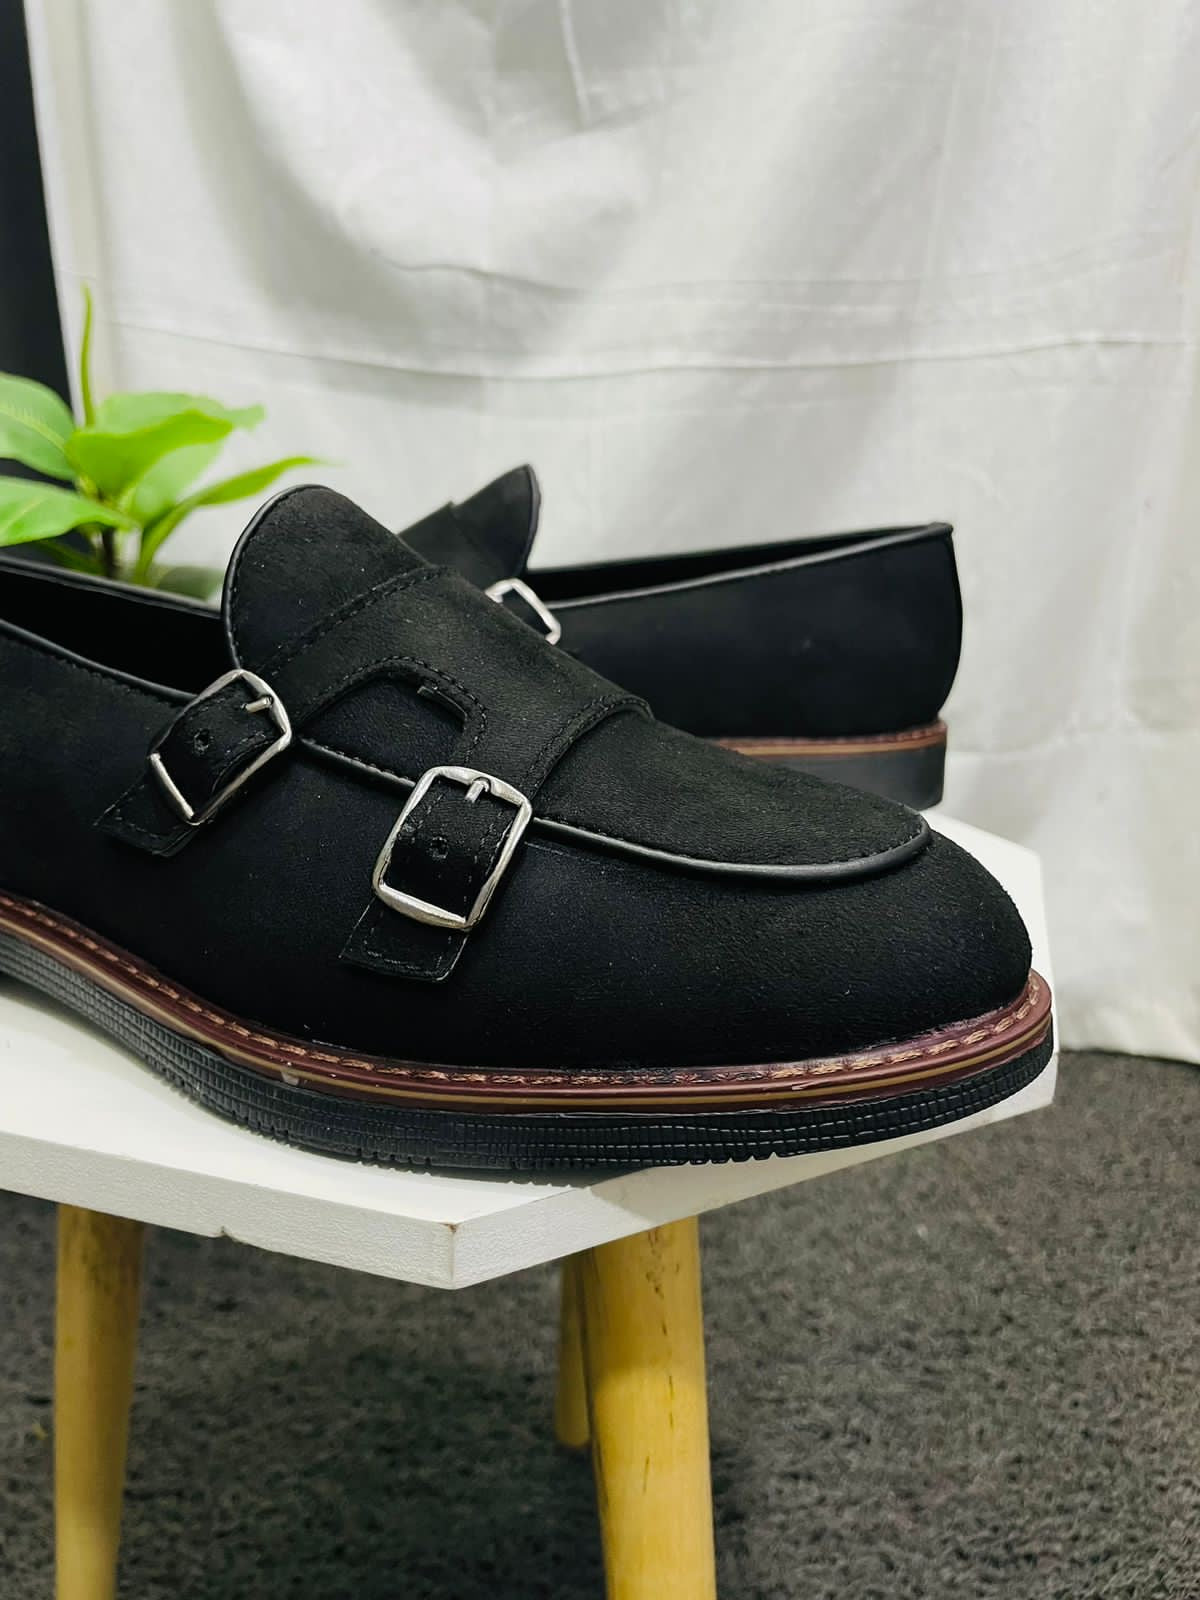 Black Suede Semi Formal Monk Strap Loafers For Causal Formal Wedding Wear Loafers